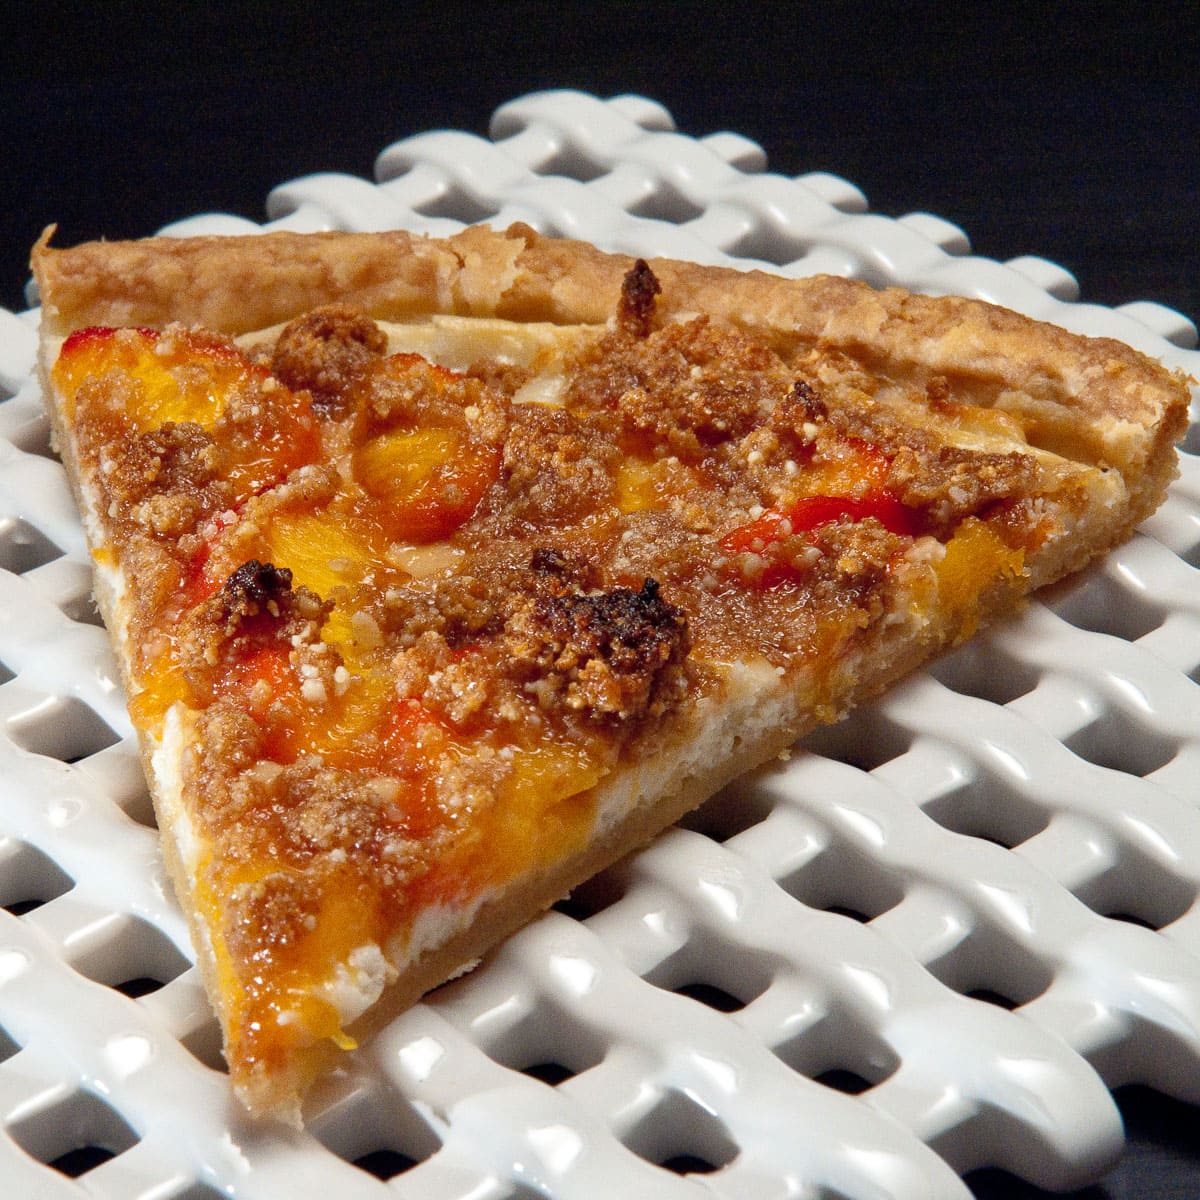 A slice of Peach Pizza sits on a white lattice tray on a black background.